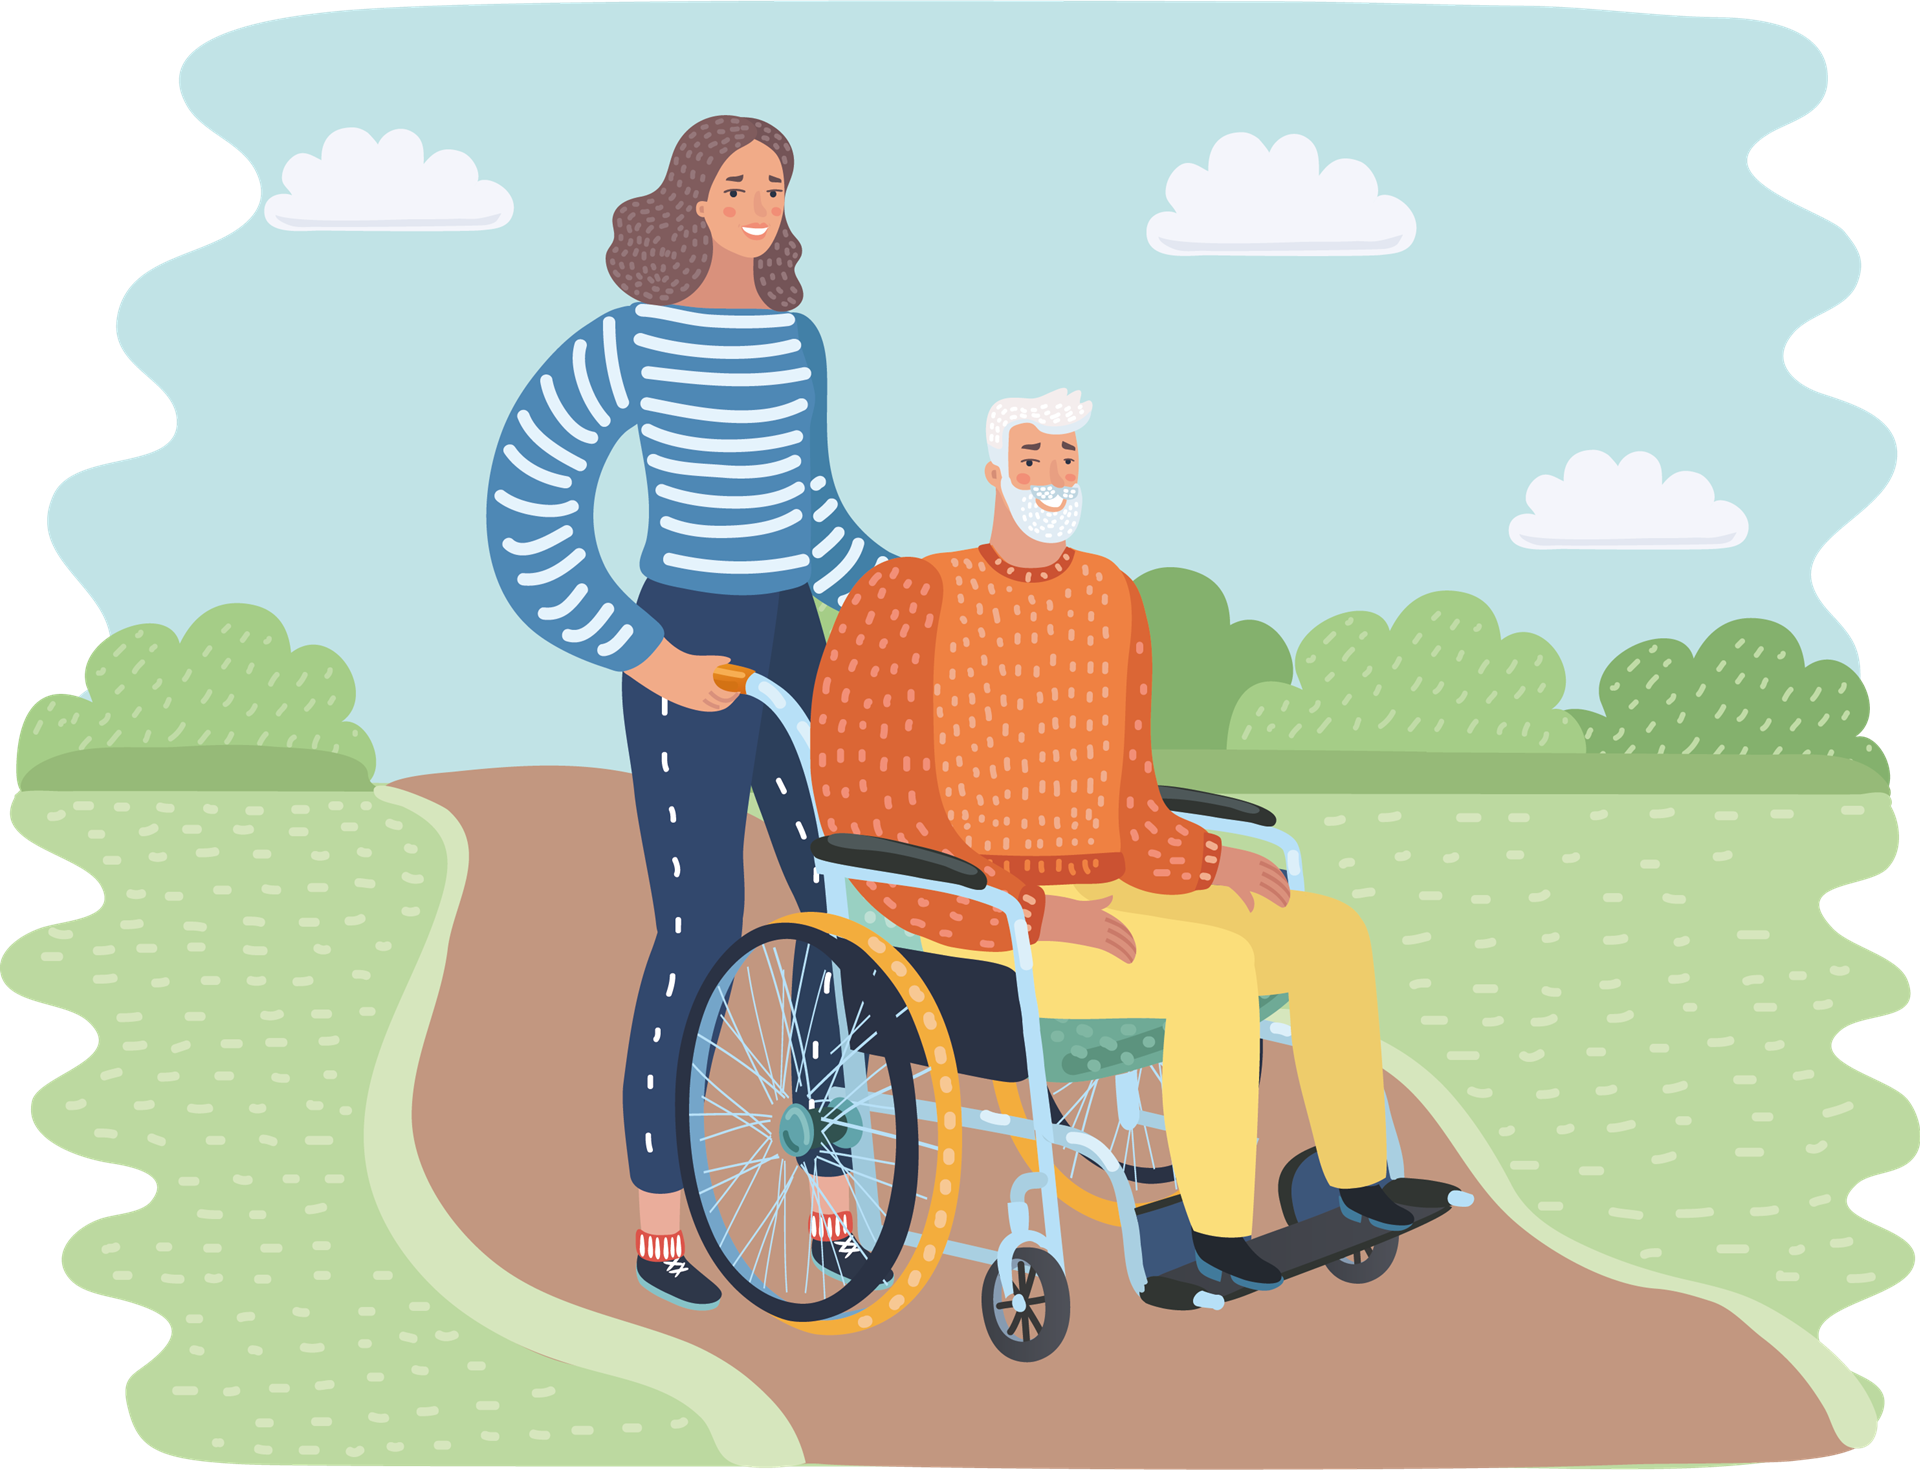 Illustration of carer pushing a man in a wheelchair